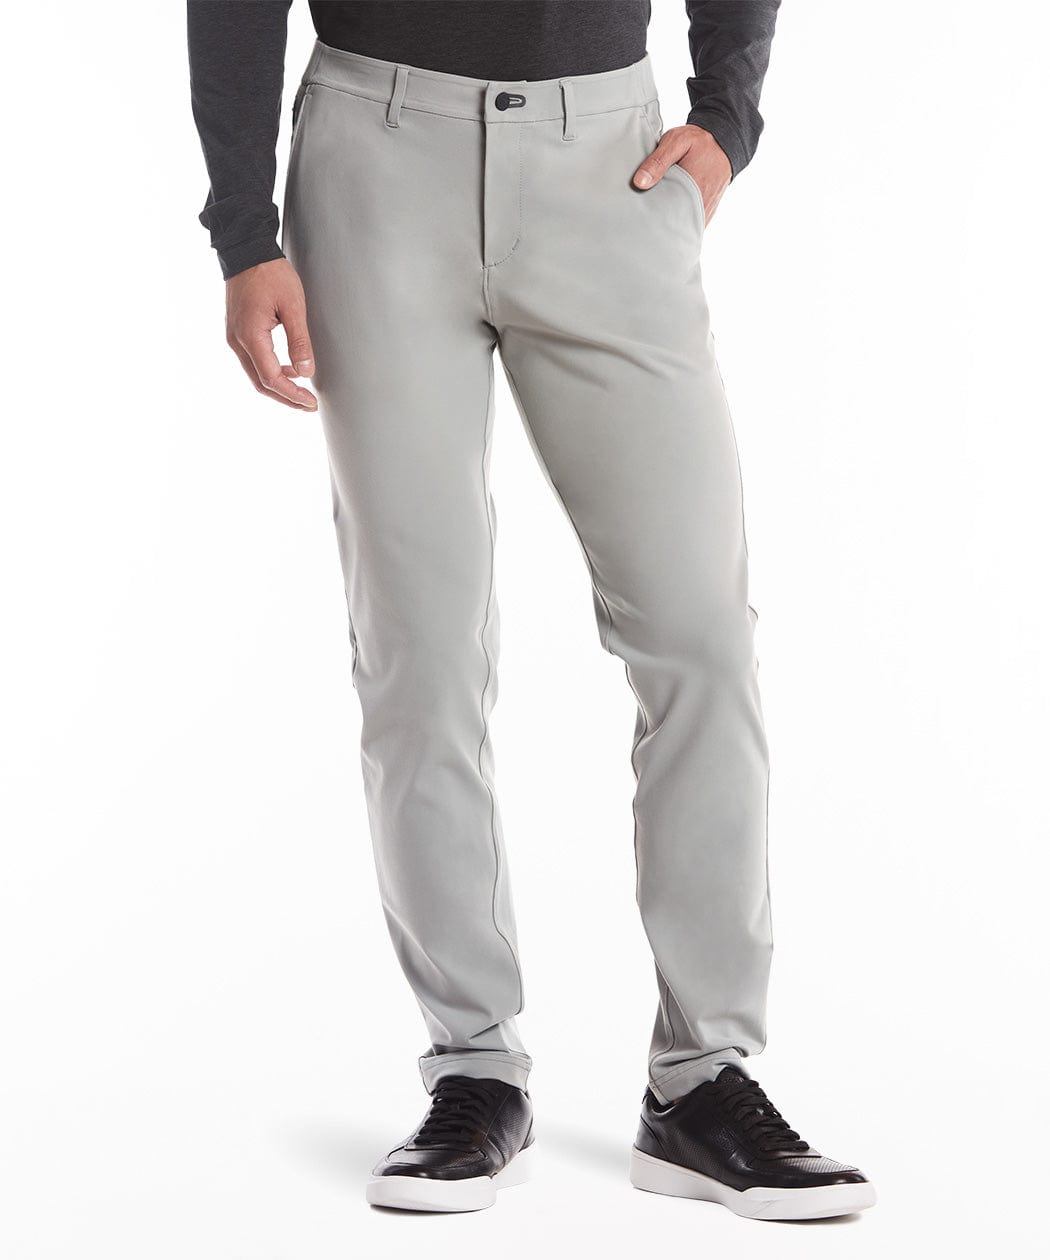 Buy Inspire Men's Slim Fit Formal Trousers (IFGSTLGR28_Grey_28) at